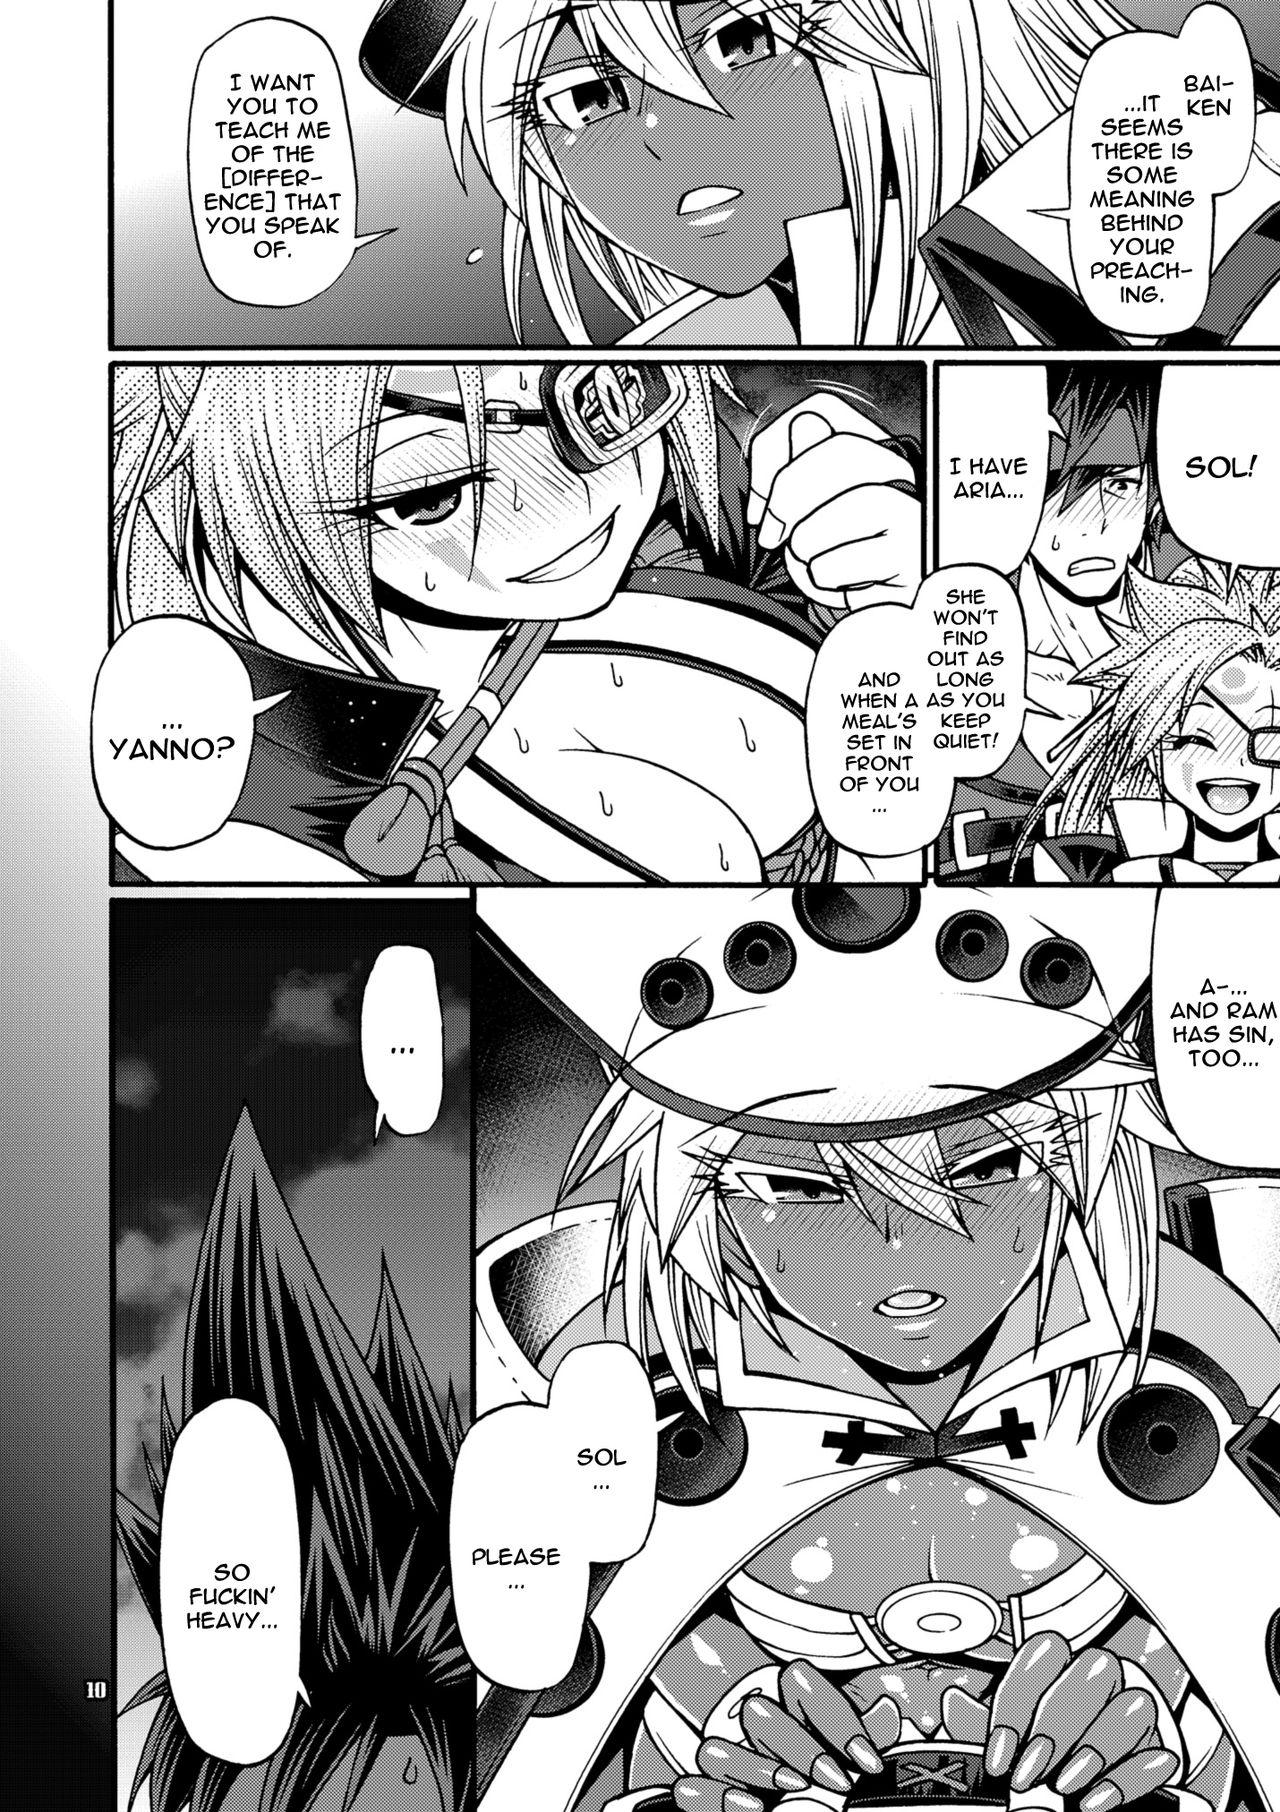 Sapphic Do What You Wanna Do - Guilty gear Orgasm - Page 9